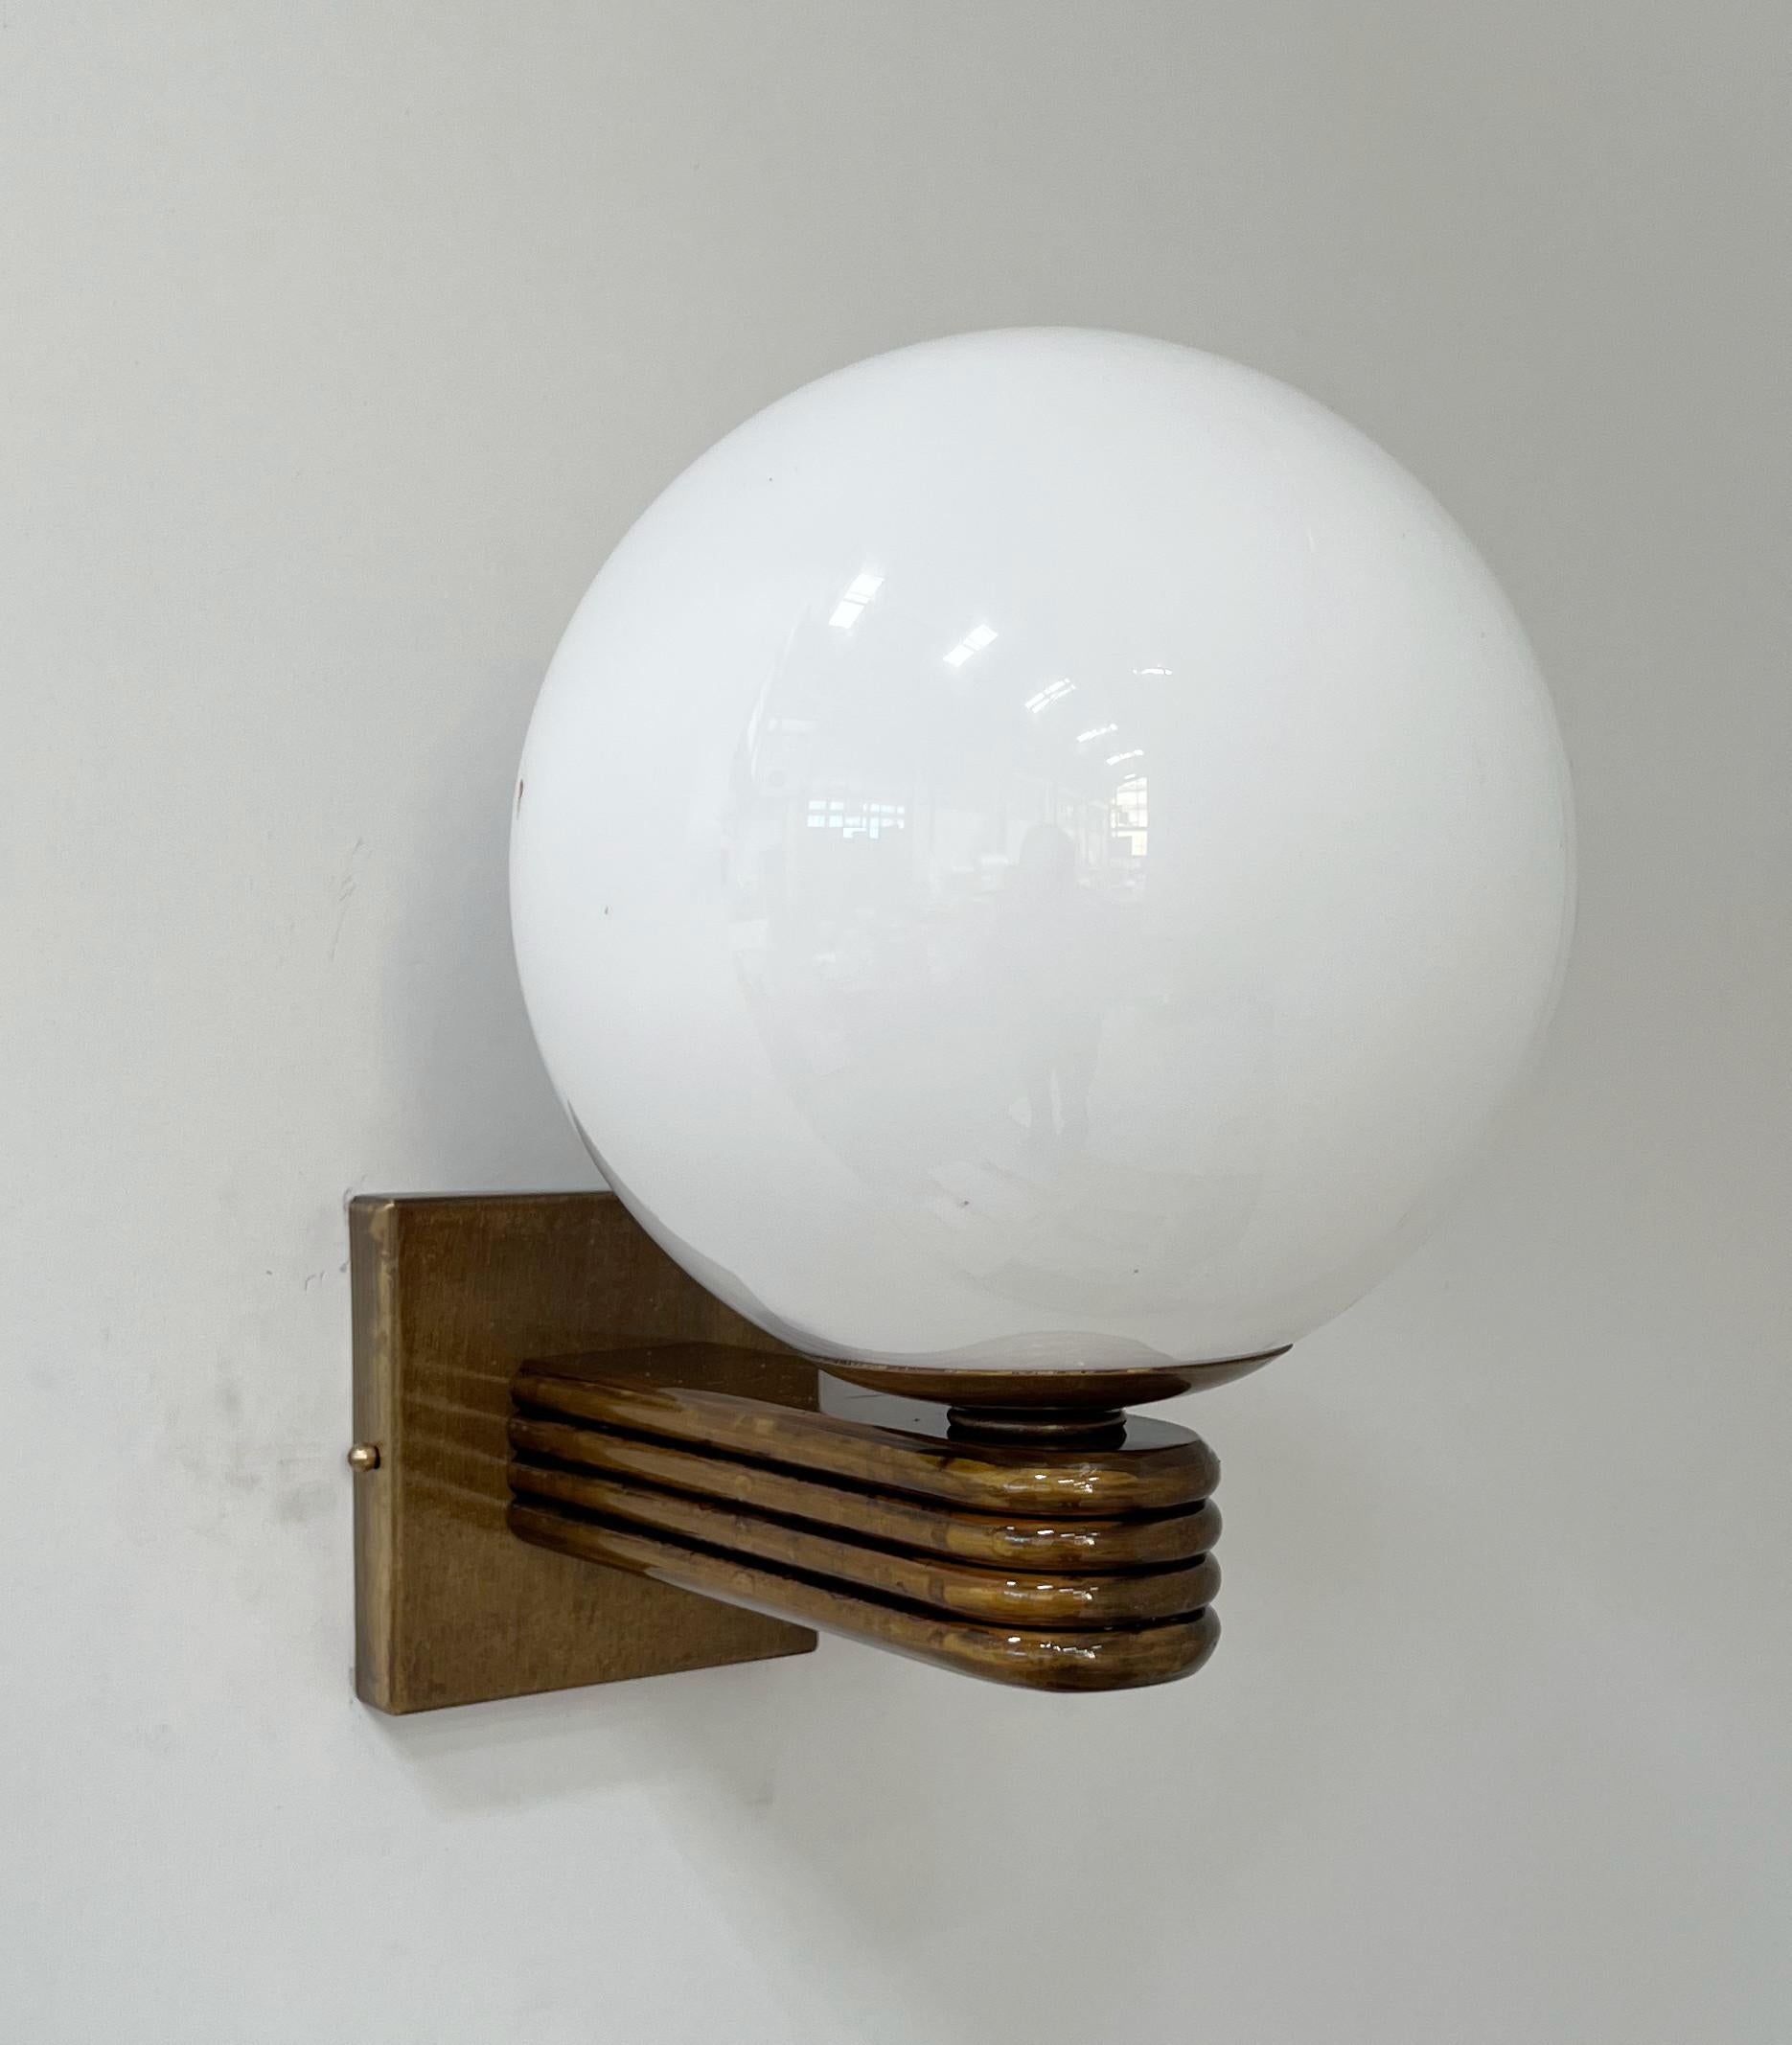 Italian Art Deco style wall light with glossy white Murano glass globe mounted on bronzed finish frame / designed by Fabio Bergomi for Fabio Ltd, made in Italy
1 light / E26 or E27 type / max 60W each
Measures: Height 12 inches, width 8 inches,